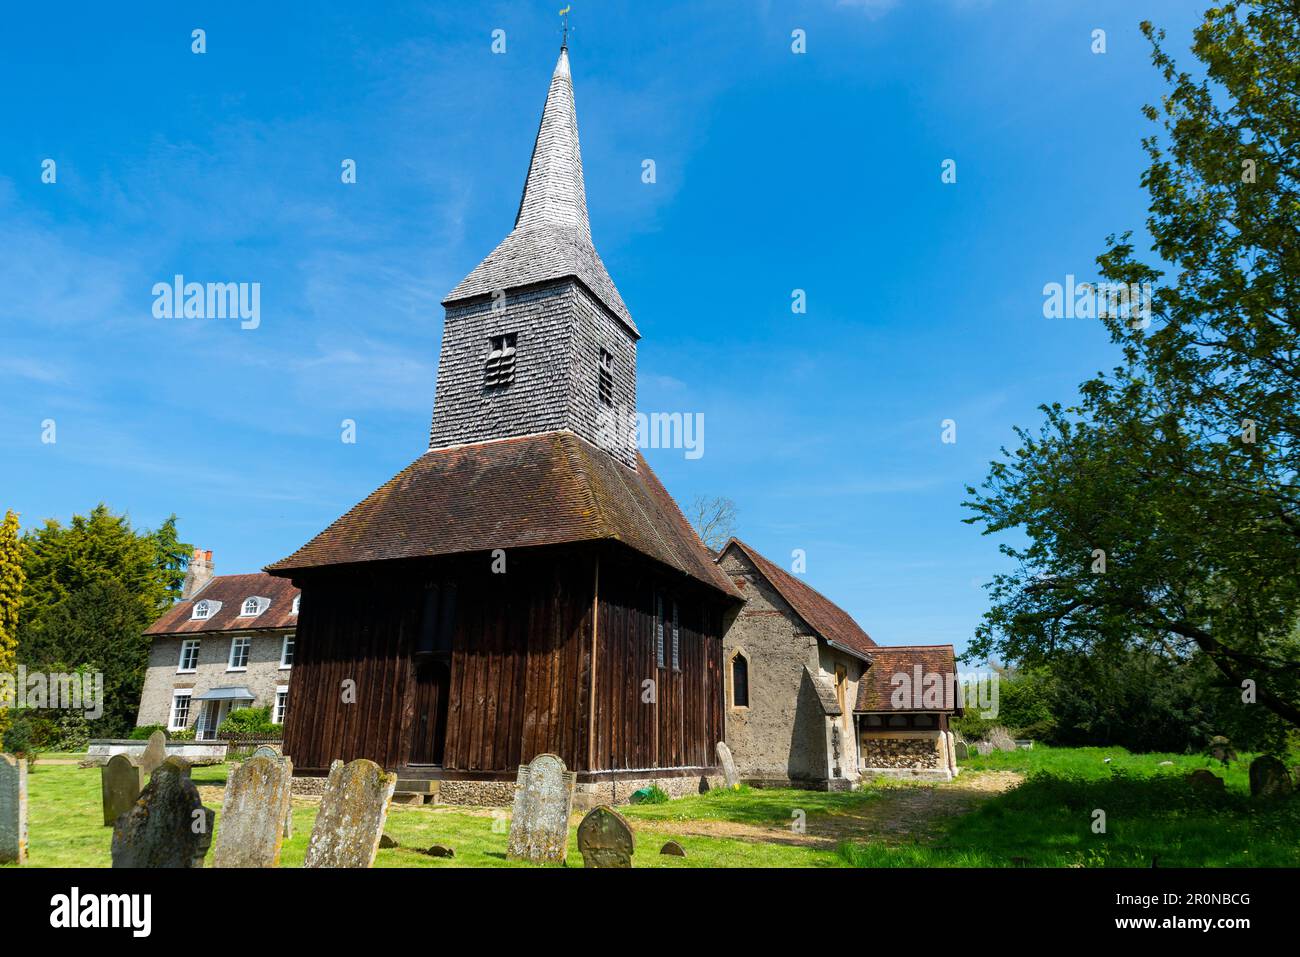 St. Margaret's church, Church Lane, Margaretting, Essex, UK. C15 Timber-framed, weatherboarded and shingled west tower with a broach spire Stock Photo